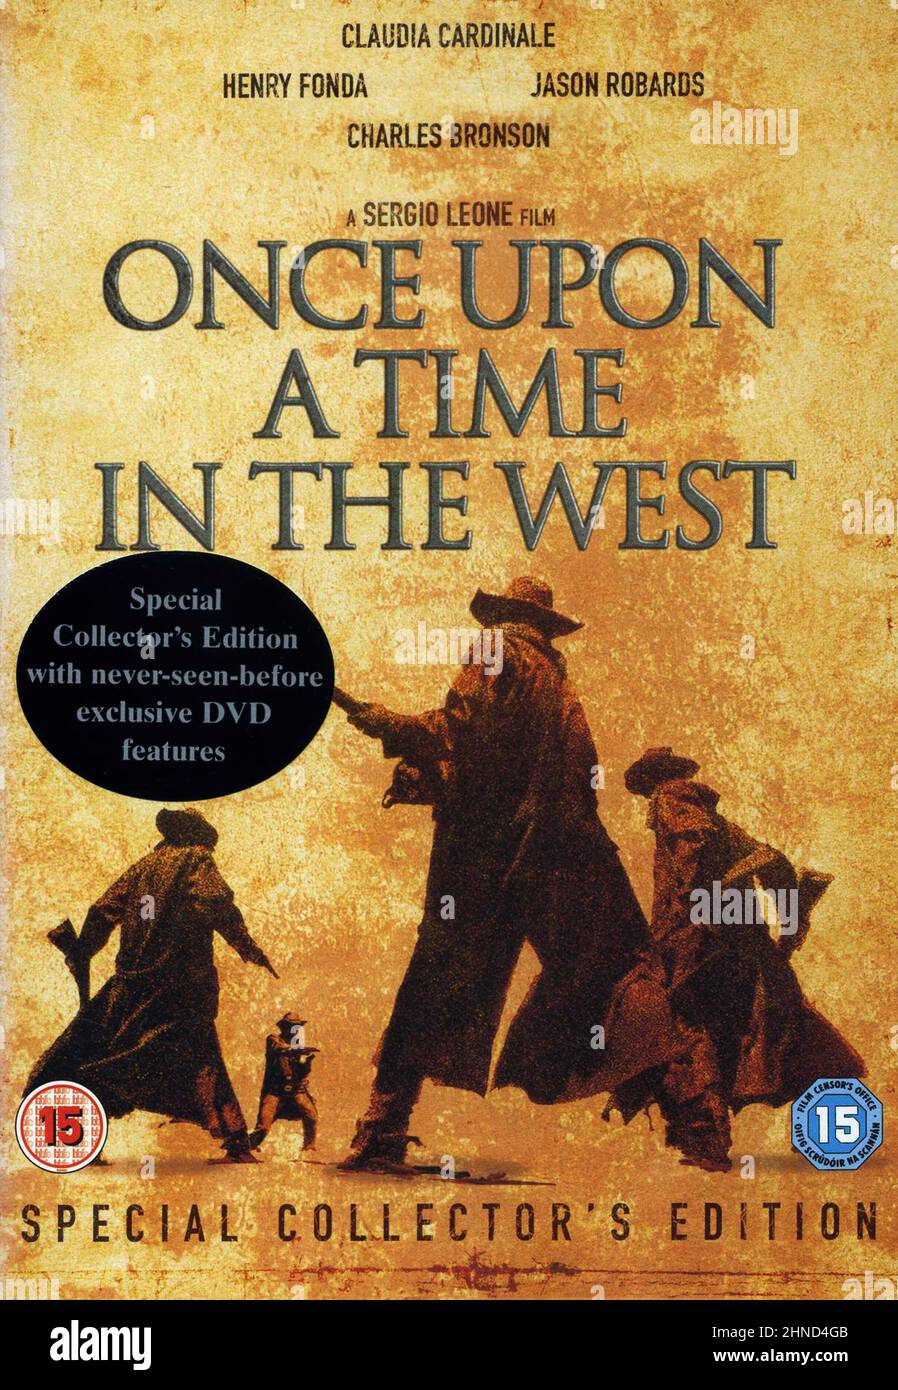 DVD Cover. "Once Upon a Time in the West". Sergio Leone Stock Photo - Alamy